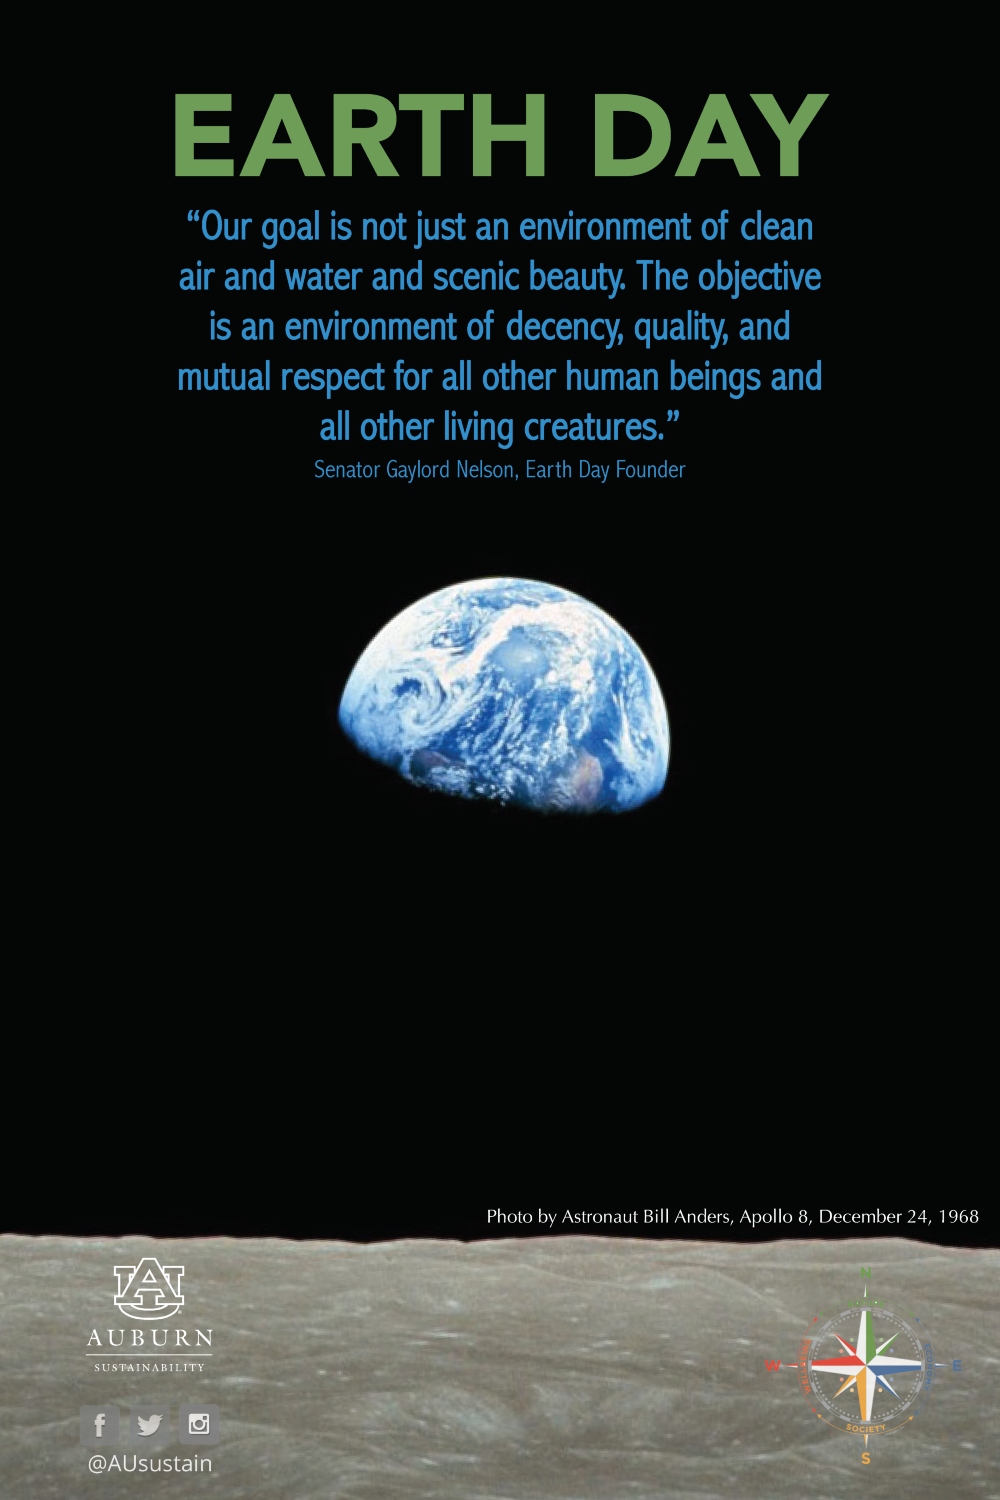 Image of the Earth rise with the Gaylord Nelson quote: "Our goal is not just an environment of clean air and water and scenic beauty. The objective is an environment of decency, quality, and mutual respect for all other human beings and all other living creatures."